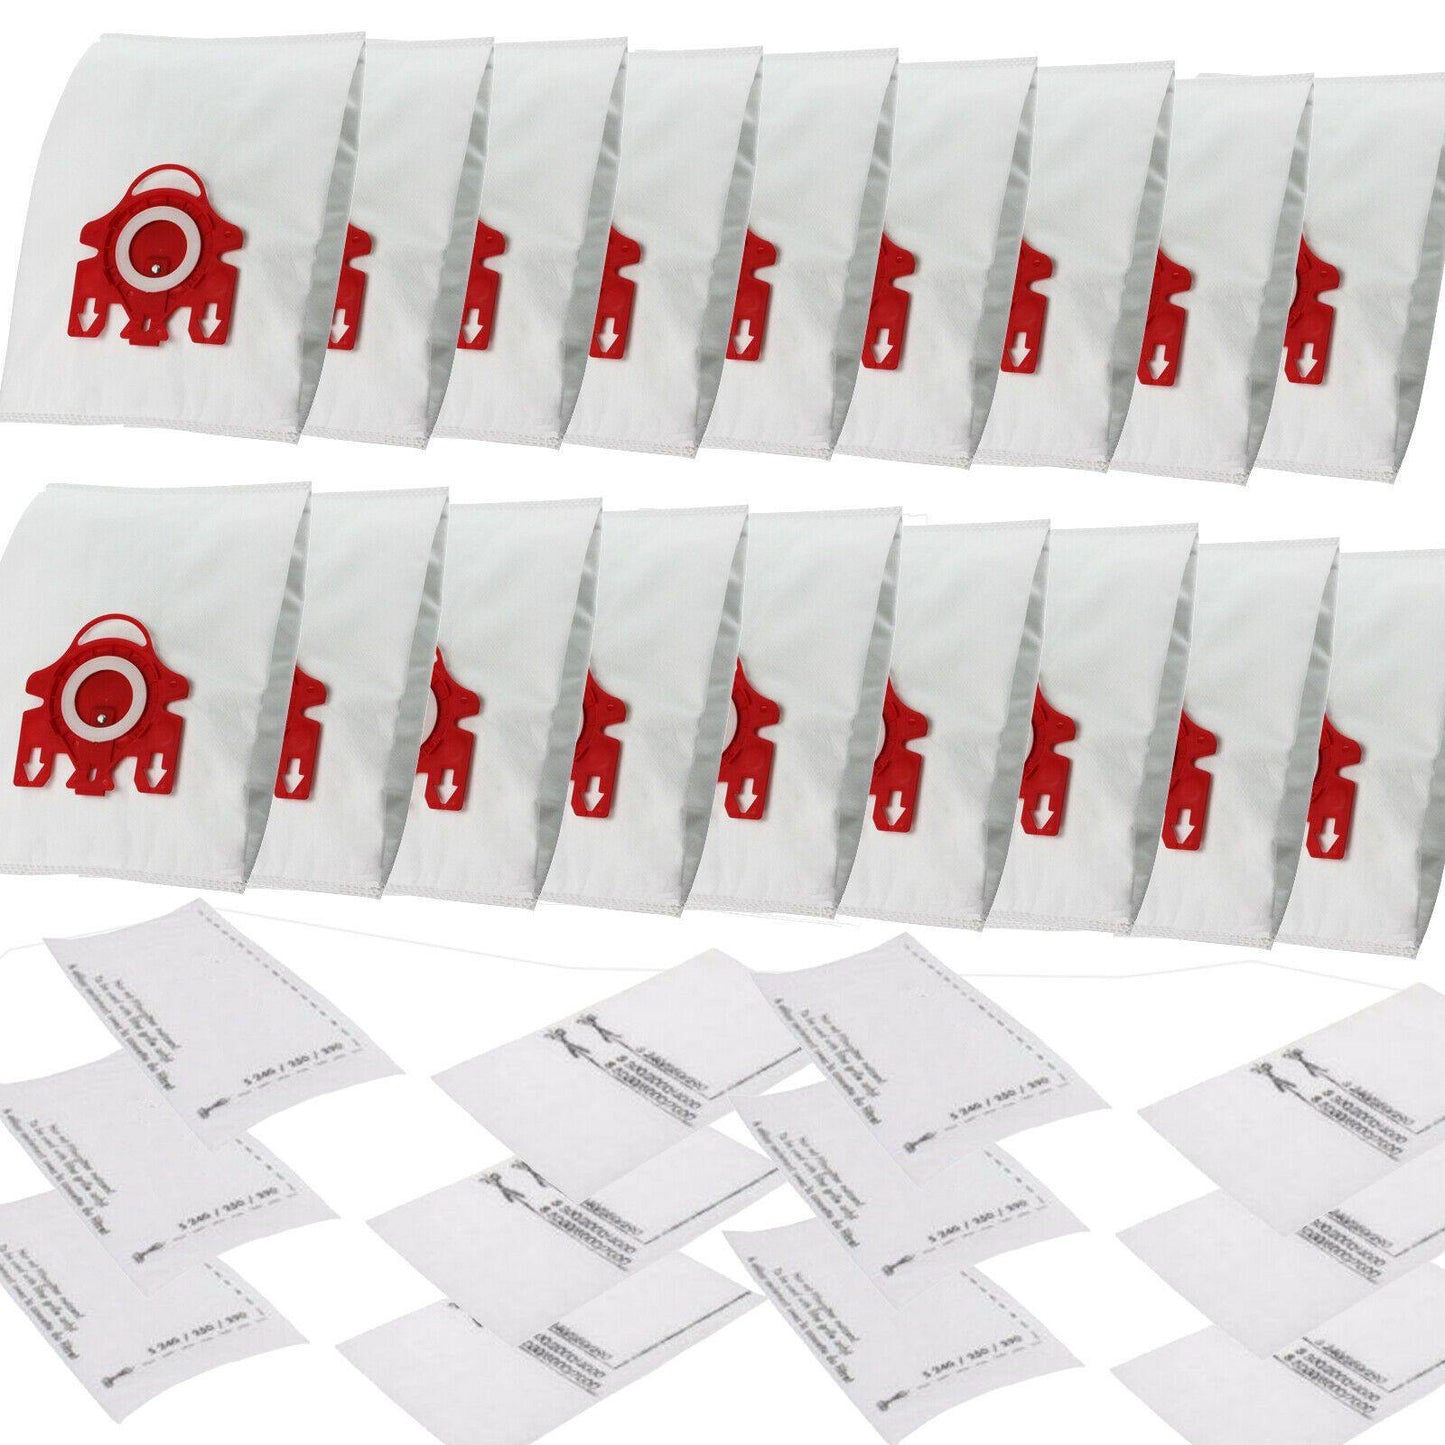 18 Vacuum Bags, 12 Filters For Miele FJM Compact C2 Allergy EcoLine PowerLine Sparesbarn